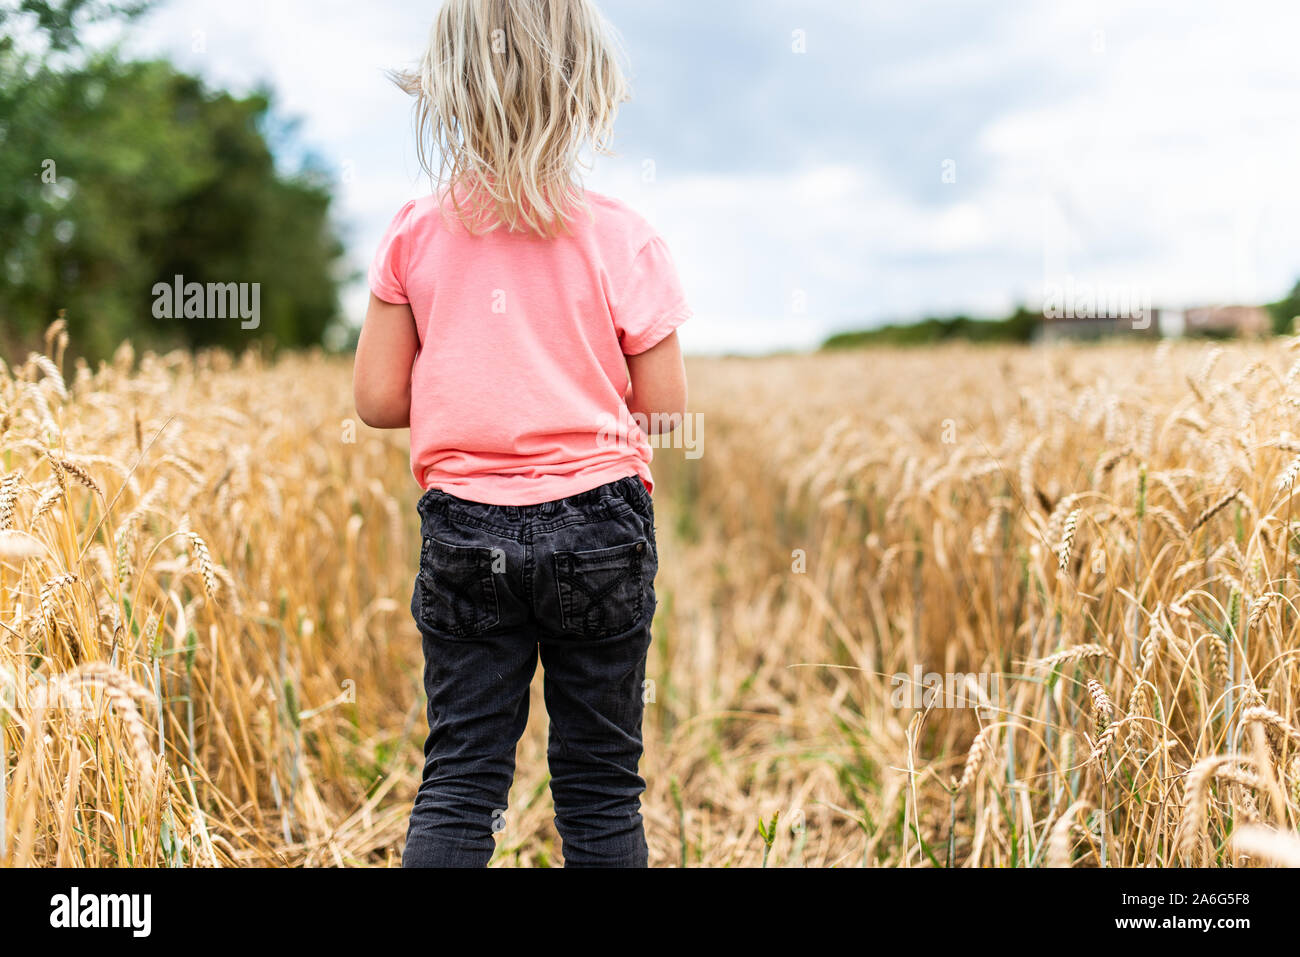 A cute little blonde girl walking through a cornfield, wheat field in the beautiful countryside Stock Photo